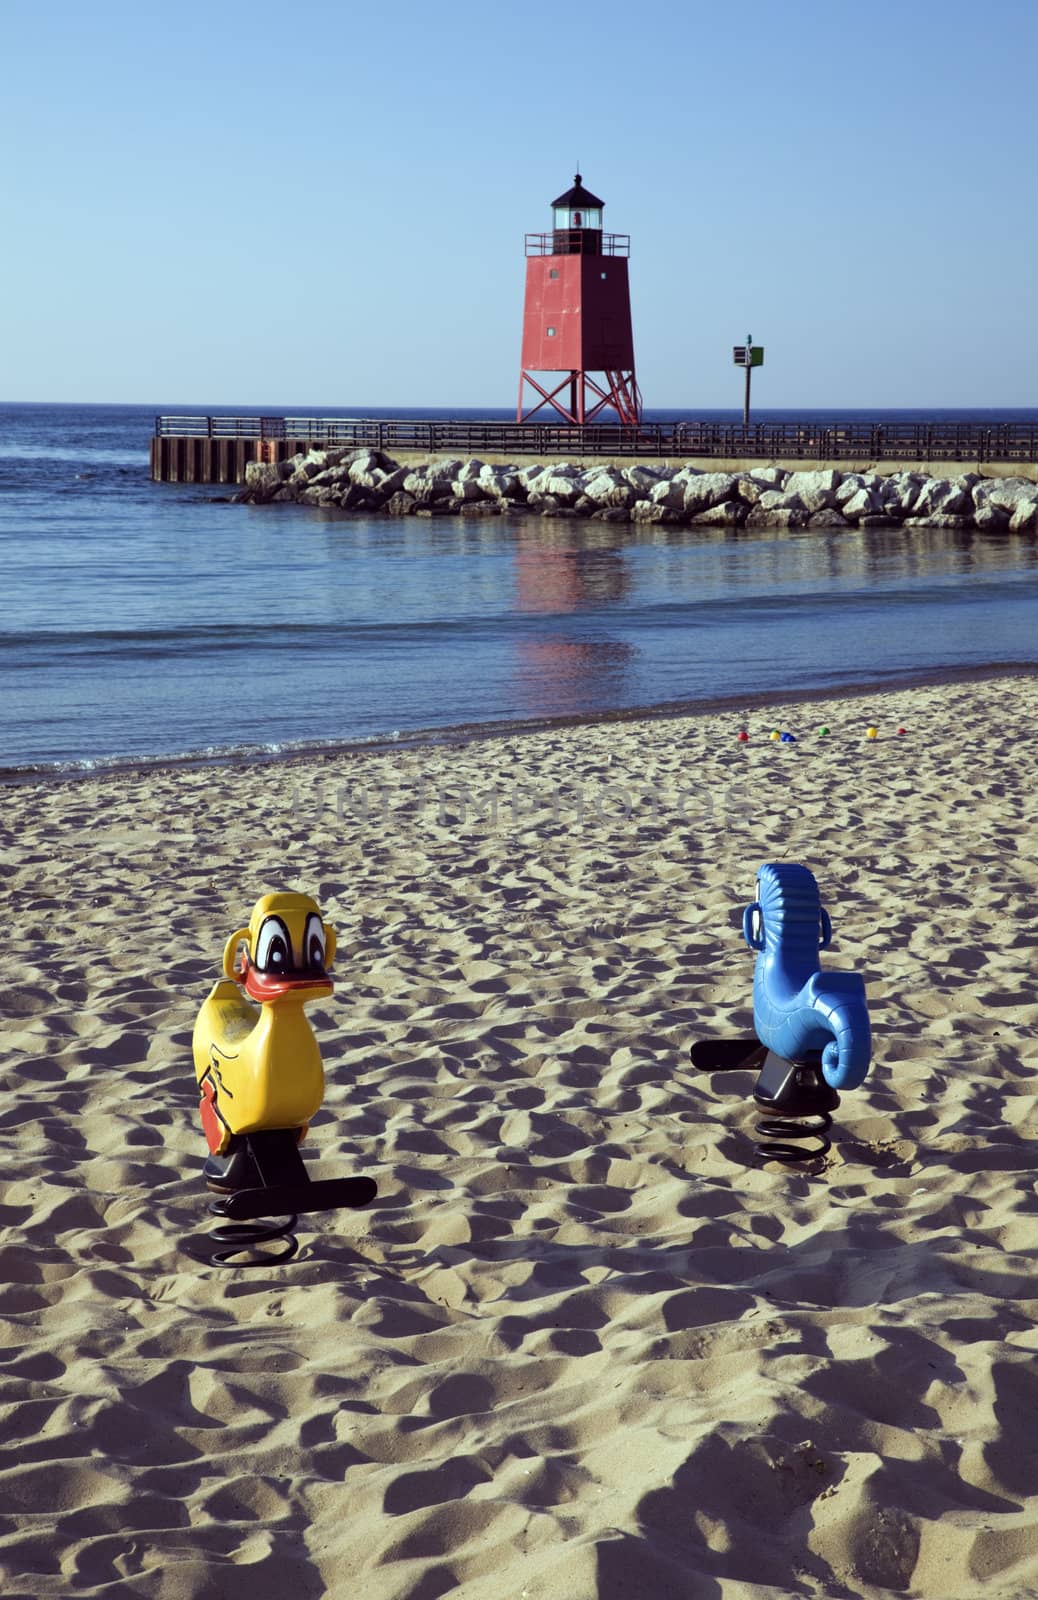 Toys on the beach - Charlevoix South Pier, Michigan, USA.